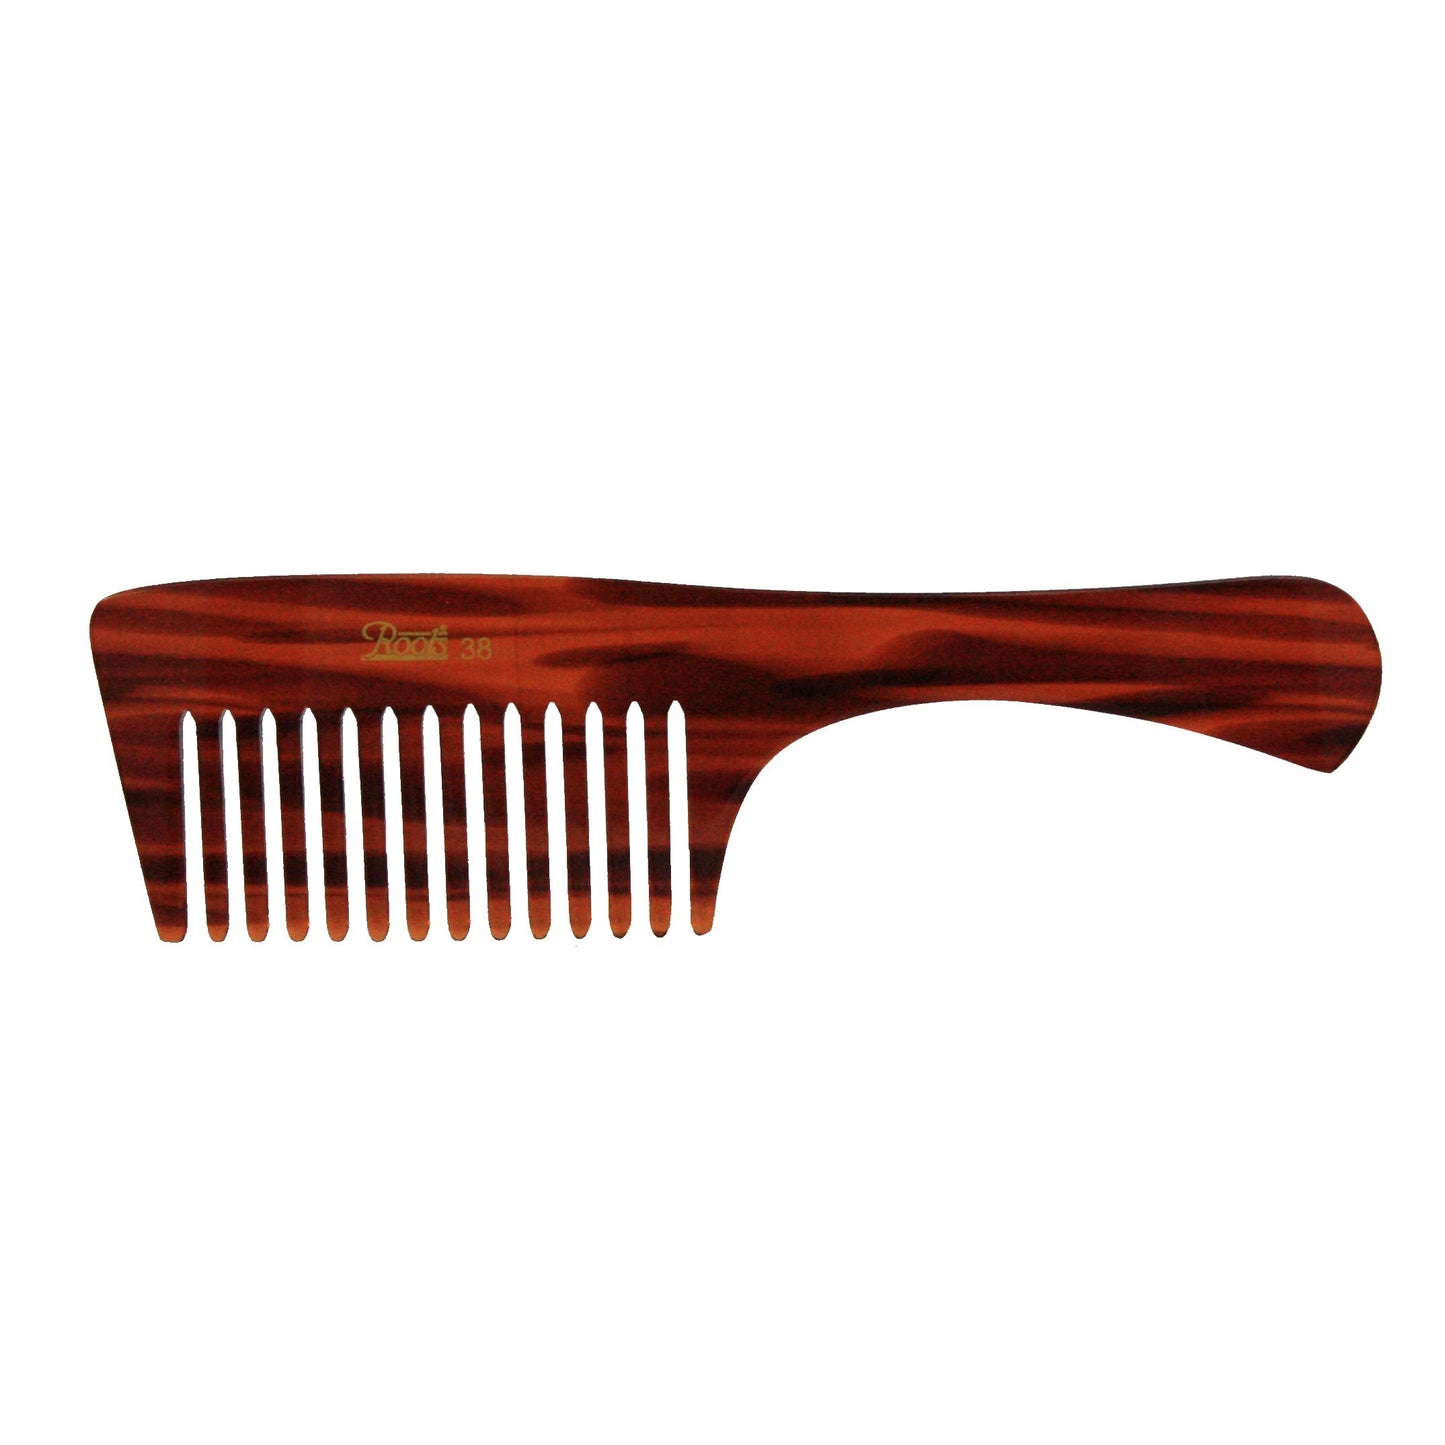 8.5in Roots Cellulose Acetate Rake Handle Comb - Clearance